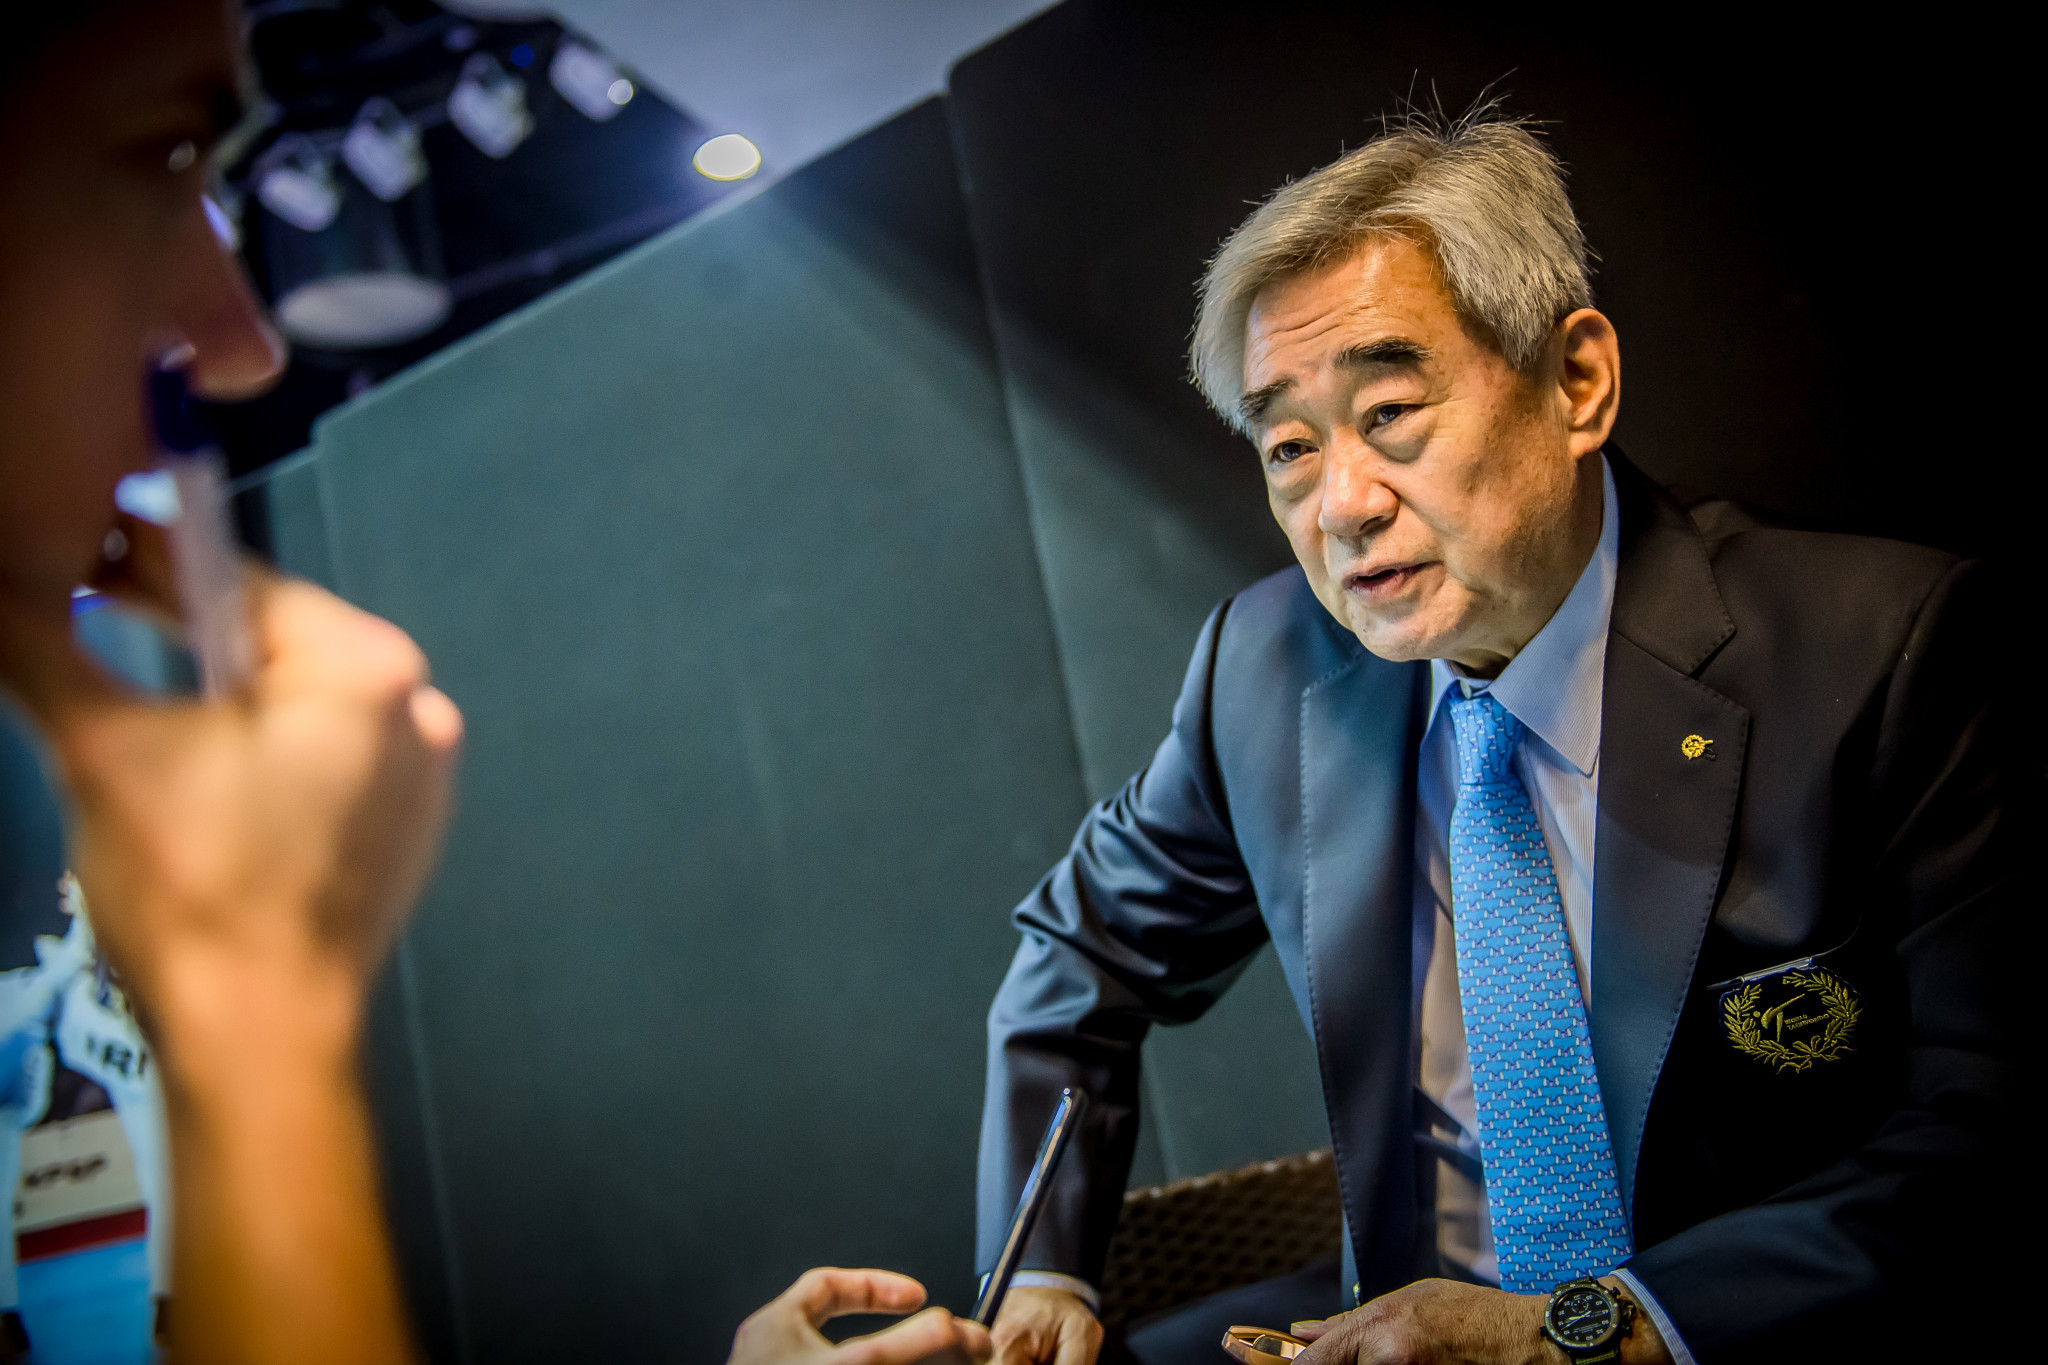 World Taekwondo President Chungwon Choue has expressed his disappointment that the governing body did not receive a promised invitation to send its Demonstration Team to last month’s ITF World Championships ©World Taekwondo